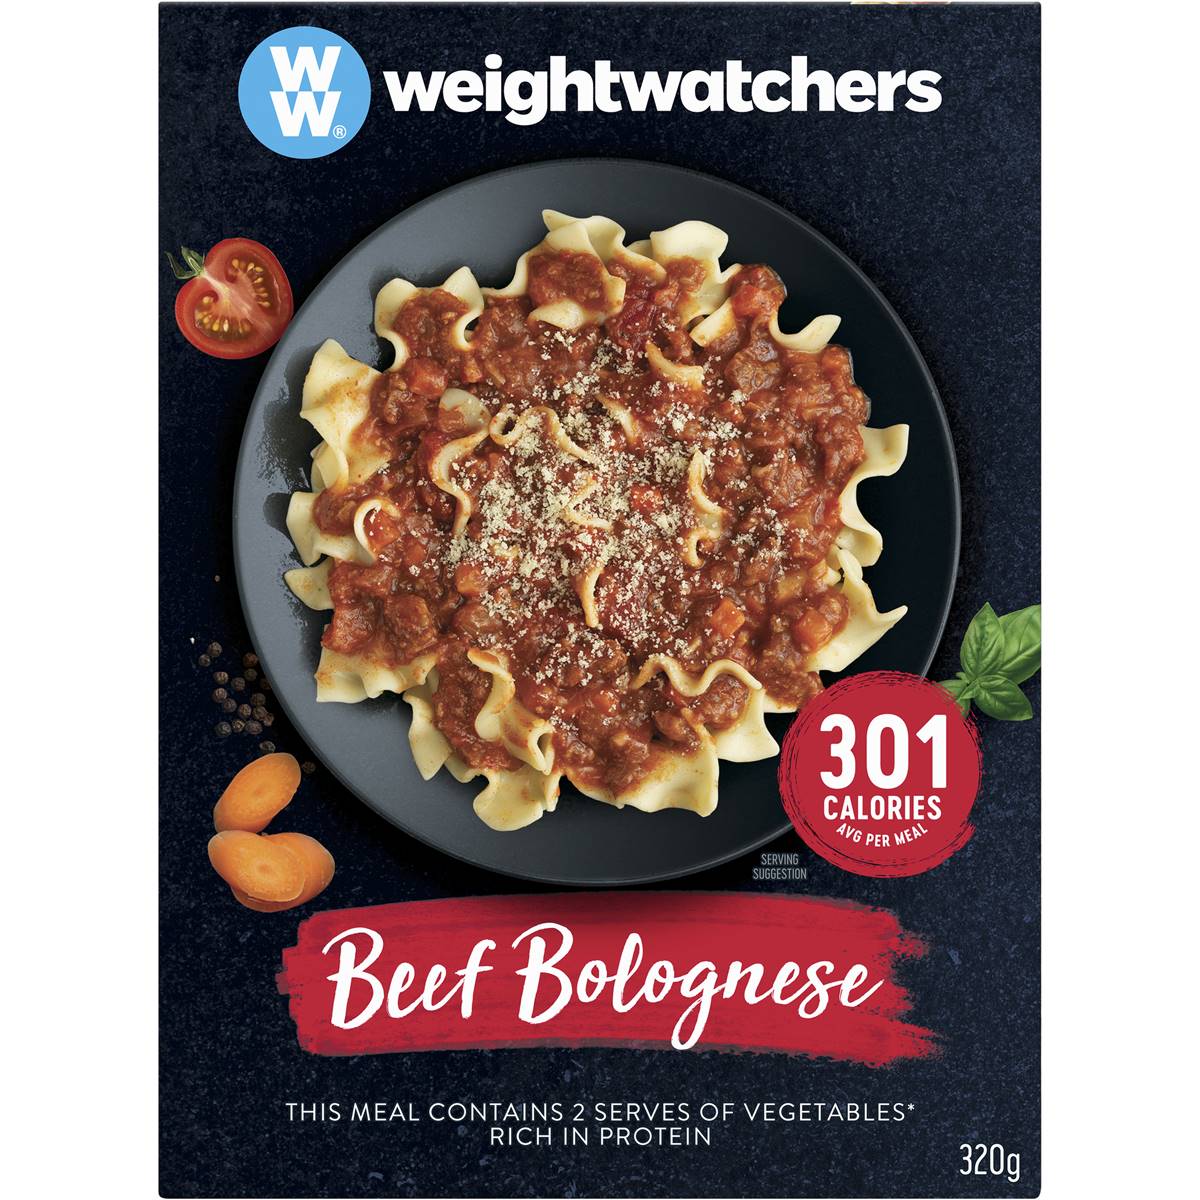 Calories in Weight Watchers Classic Beef Bolognese